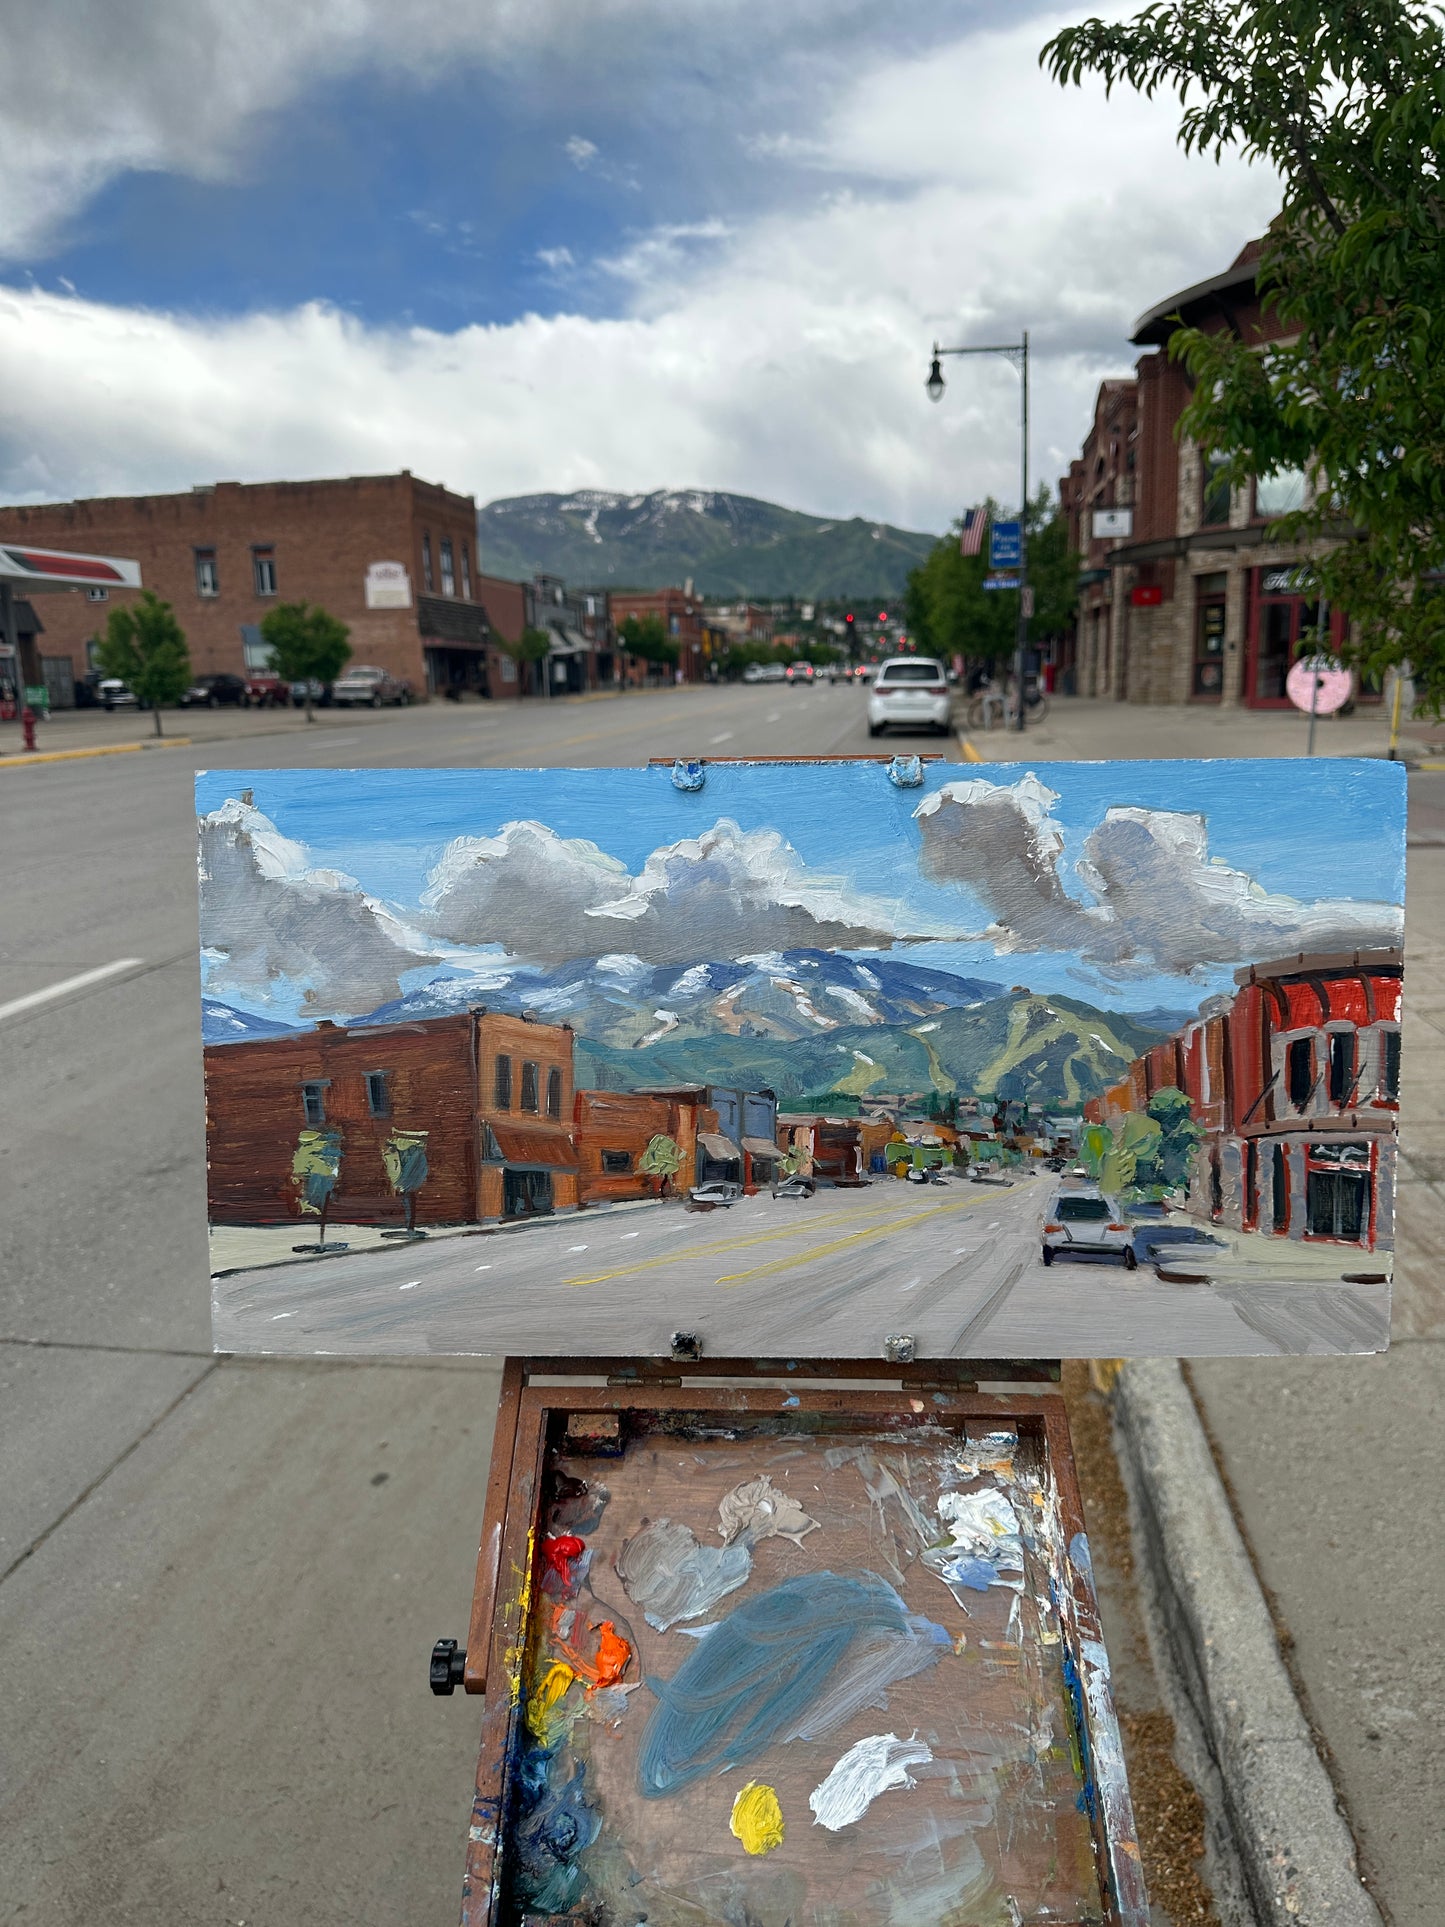 Downtown Steamboat Springs